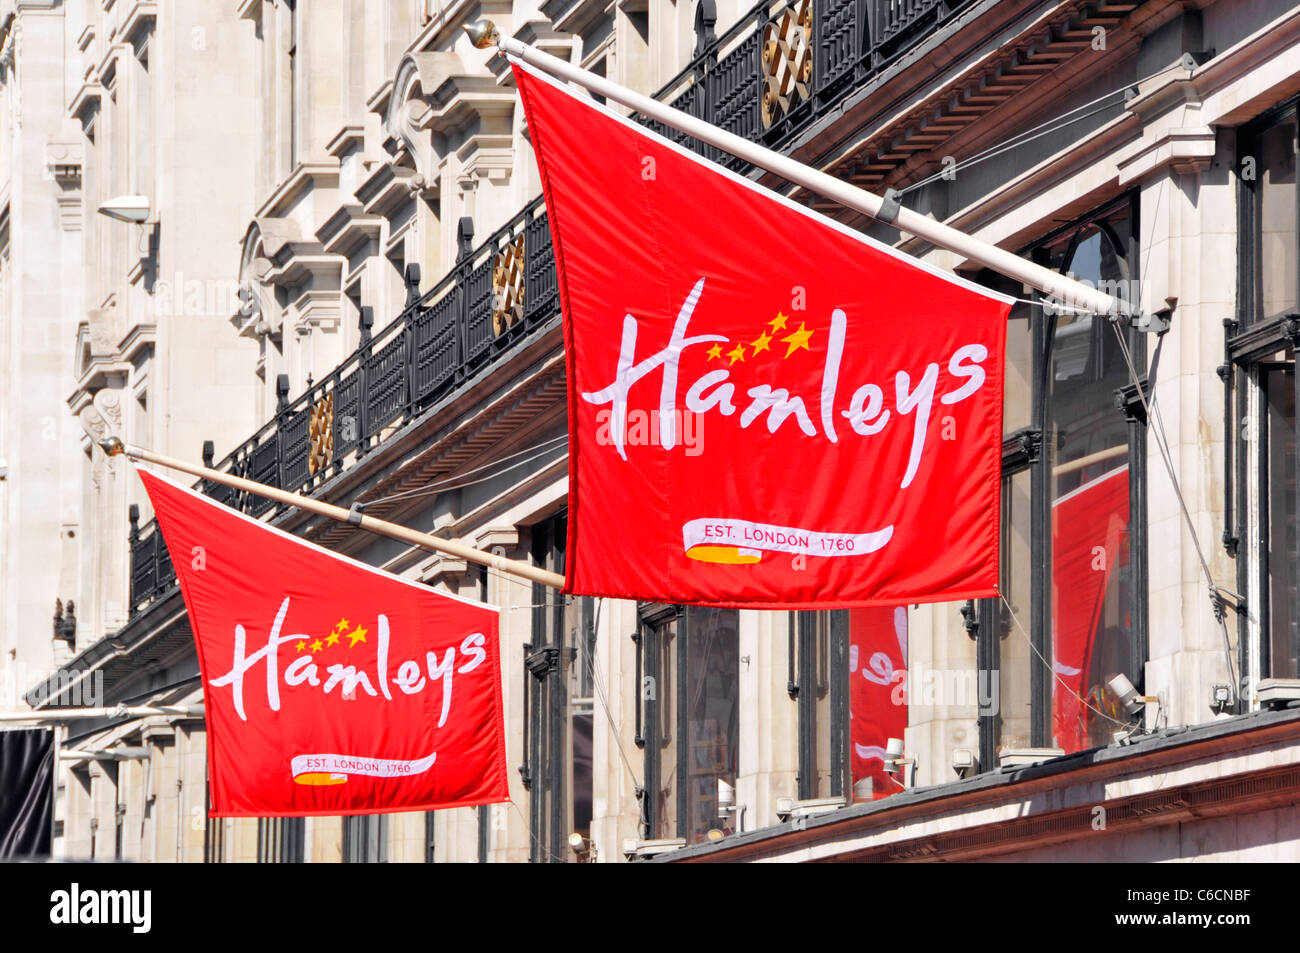 Street scene Hamleys logo on banners at famous flagship retail toy shop store business in London West End shopping location Regents Street England UK Stock Photo